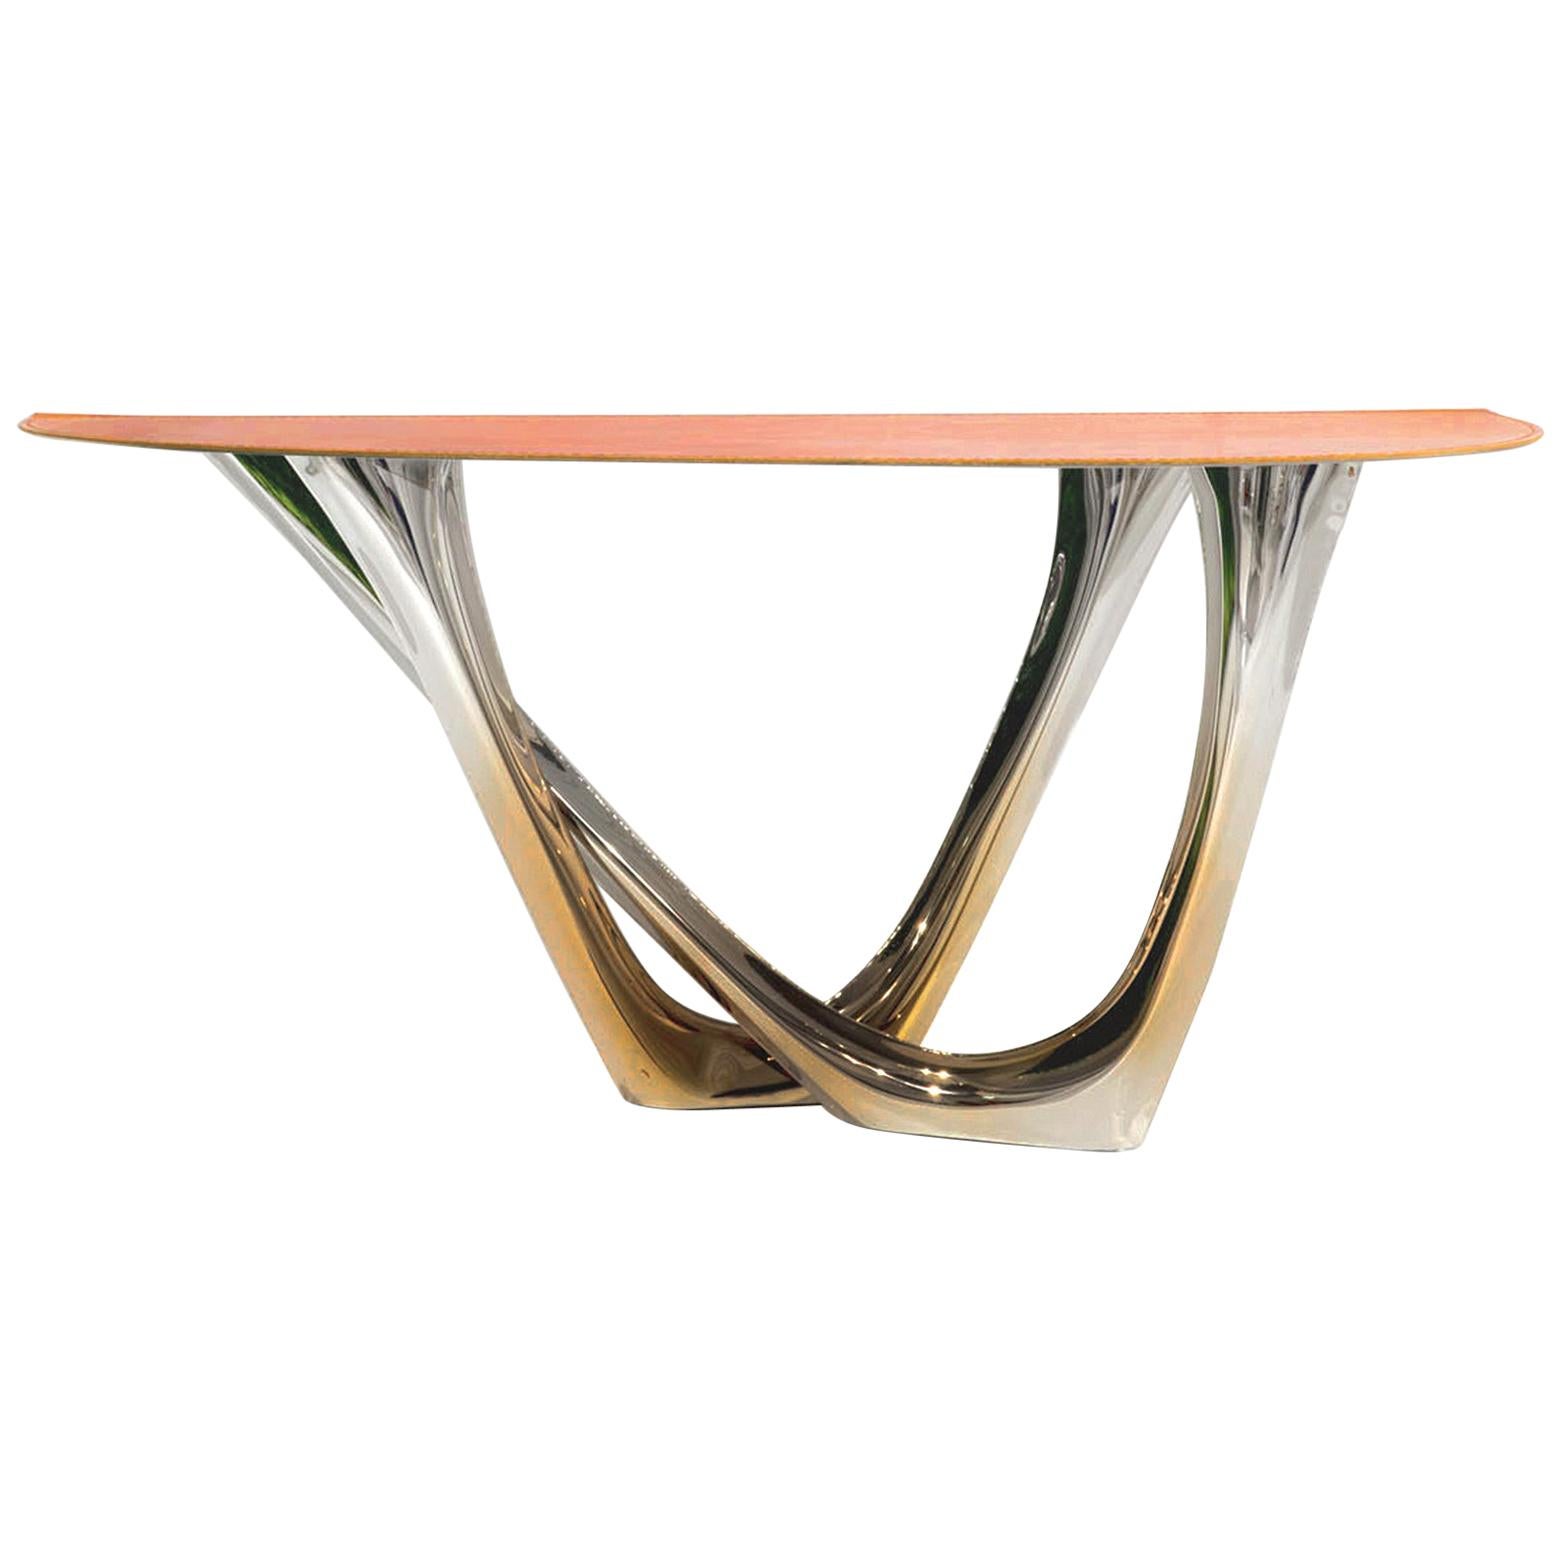 G-Console Duo Table in Gold Flamed Stainless Steel Leather Top by Zieta